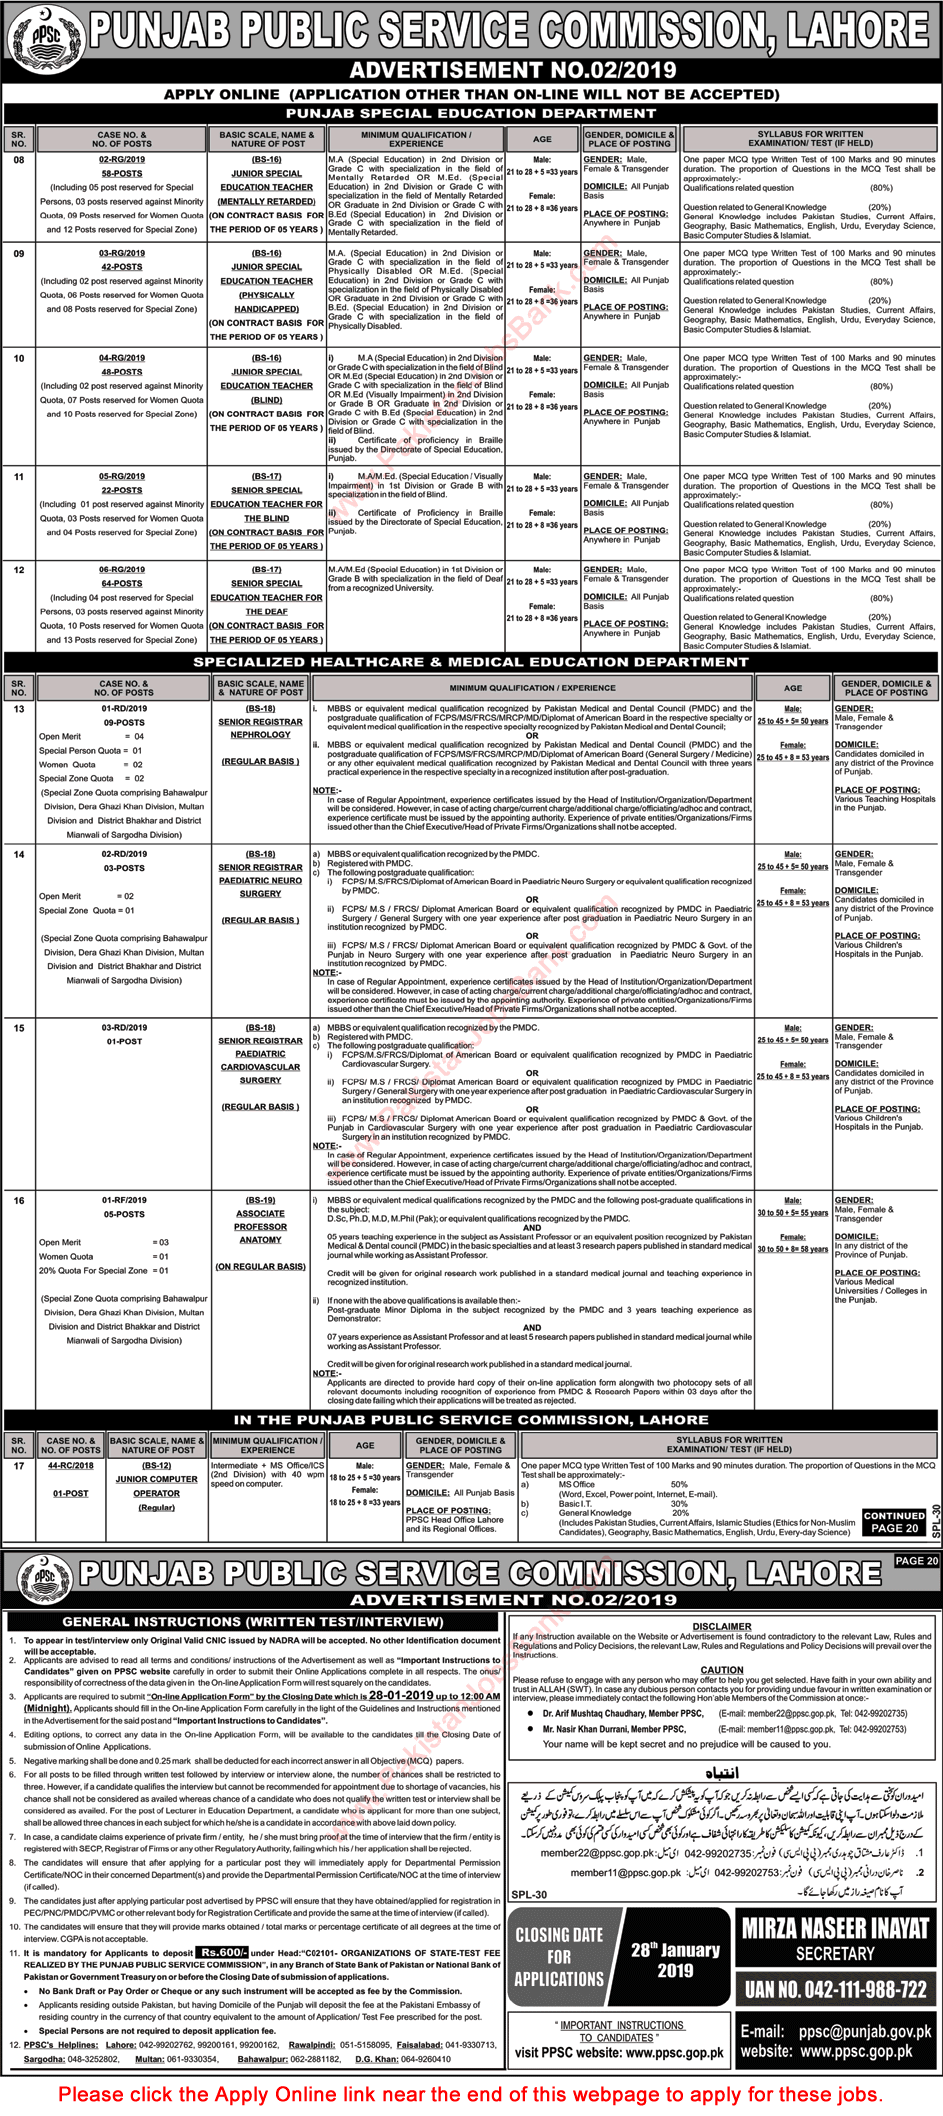 PPSC Jobs 2019 January Apply Online Consolidated Advertisement No 02/2019 2/2019 Latest